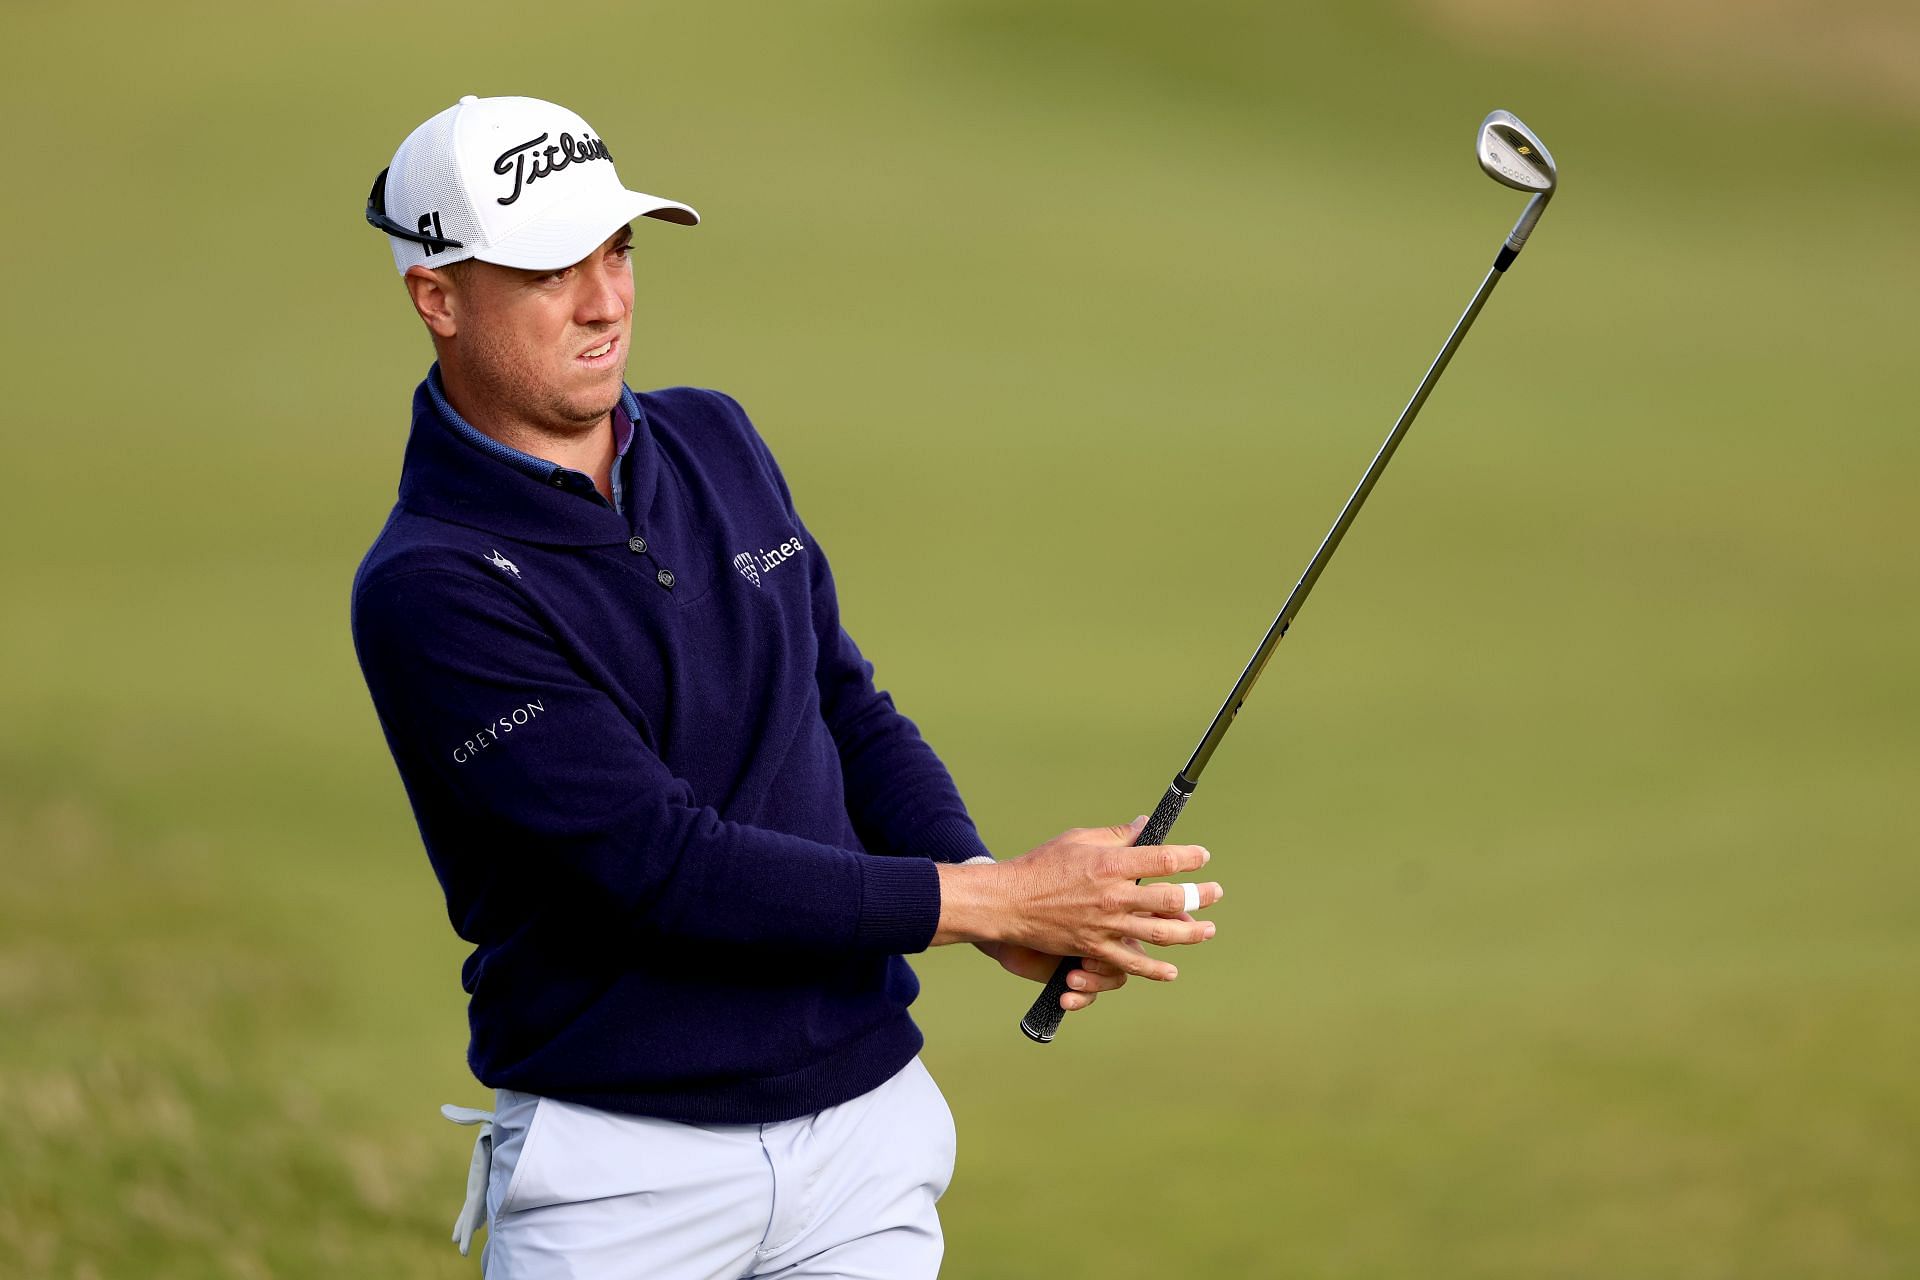 Justin Thomas at The 151st Open (Image via Getty)